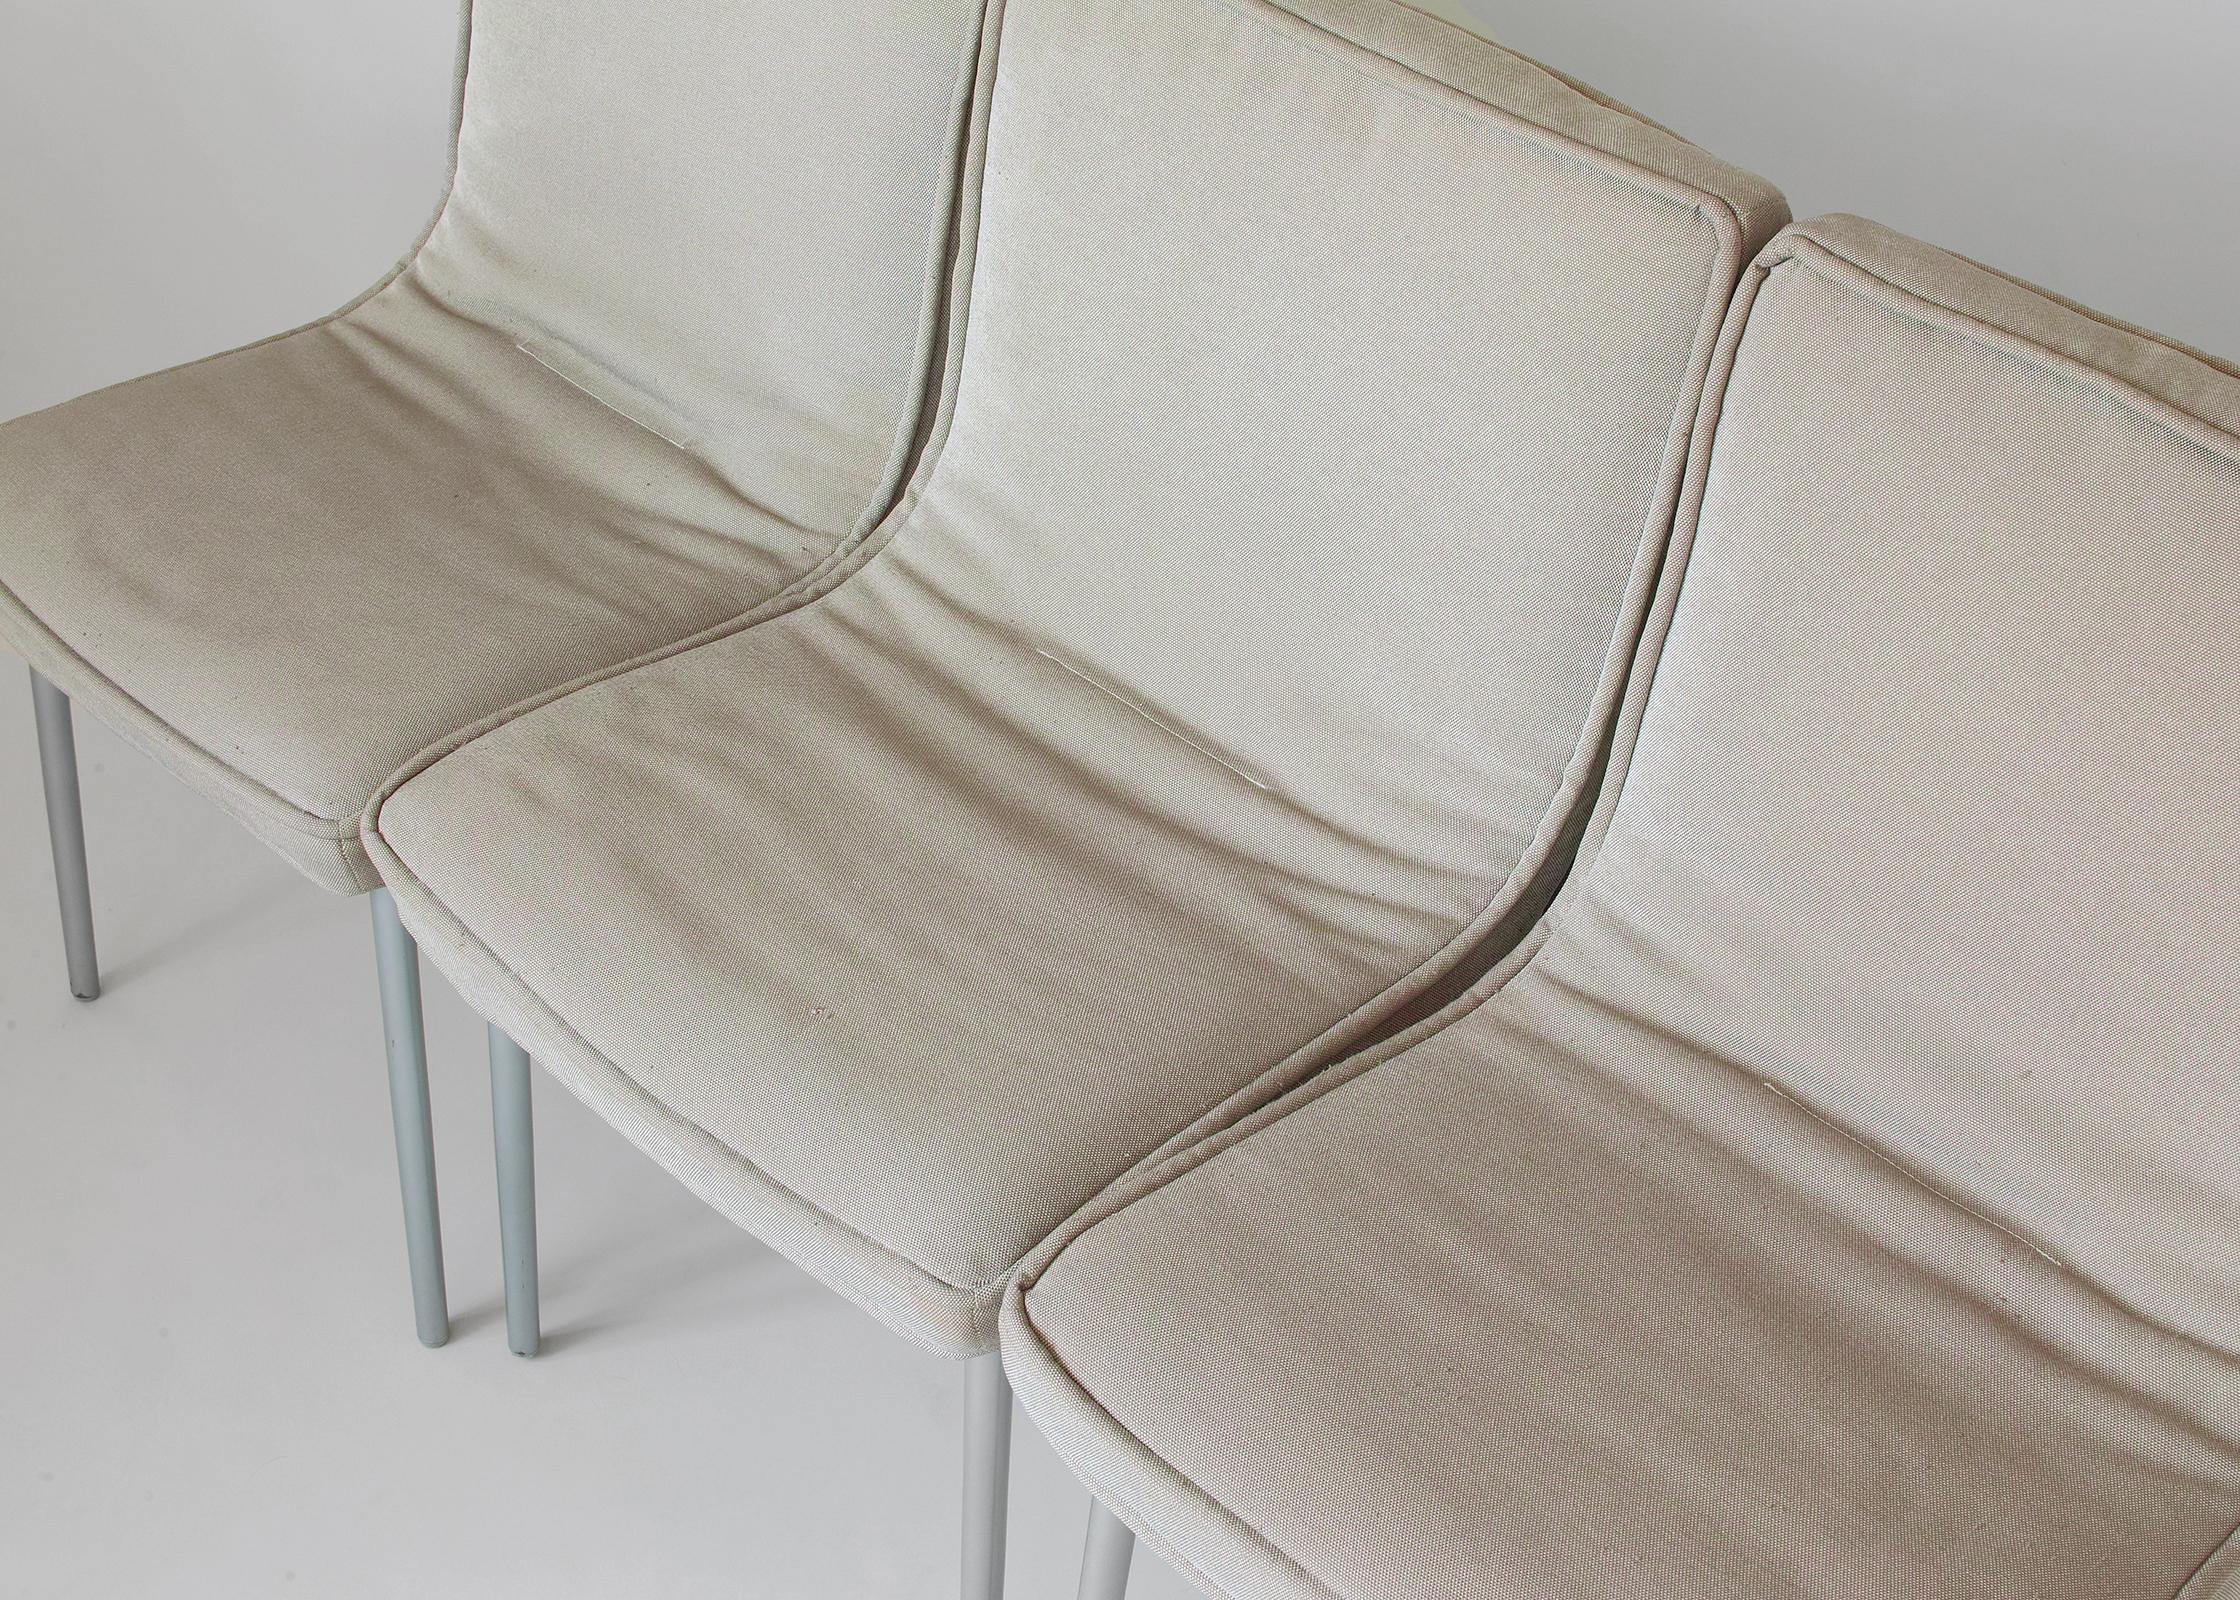 Late 20th Century Ligne Roset French Modern Dining Chairs Attributed to Christain Werner